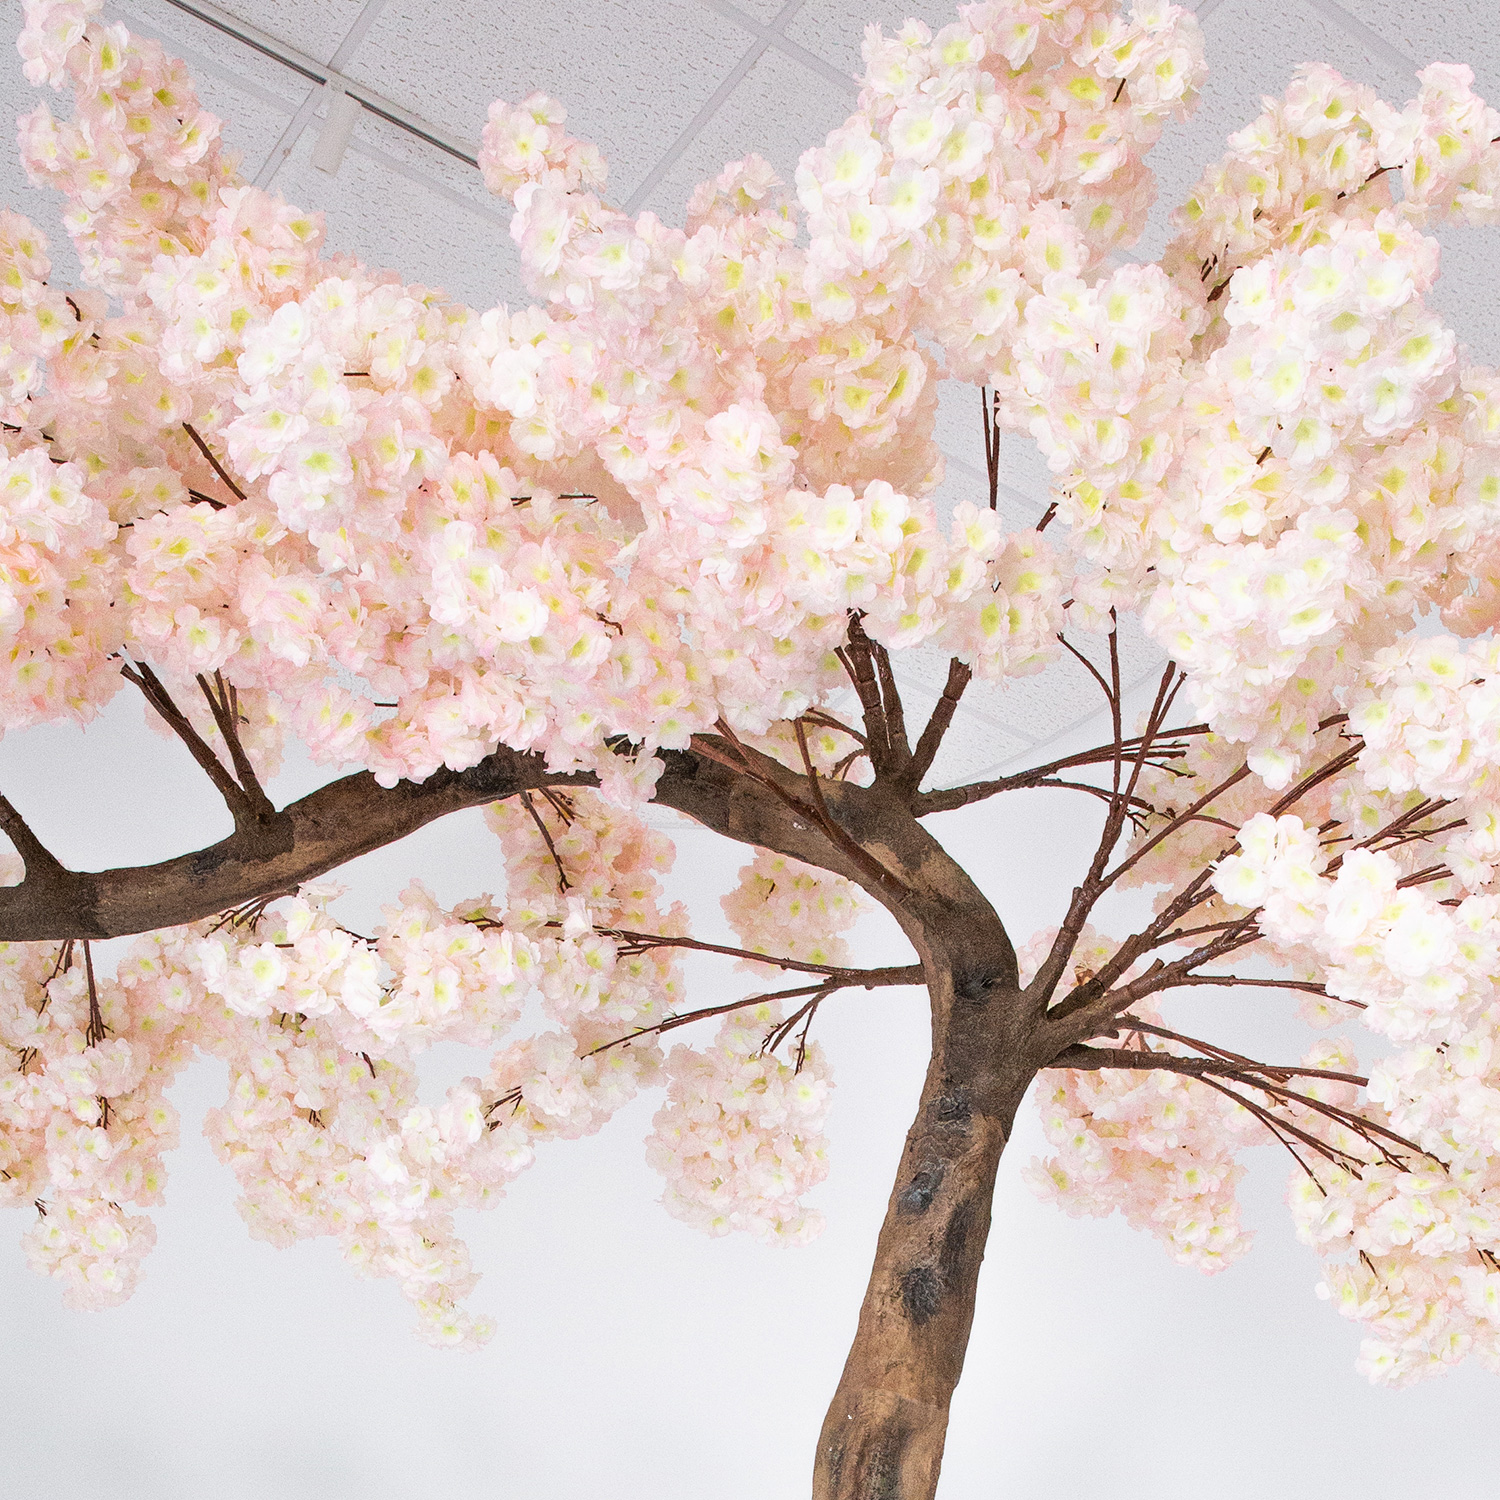 Interchangeable 40 Faux Cherry Blossom Branch, Draping Pink Silk Flowers